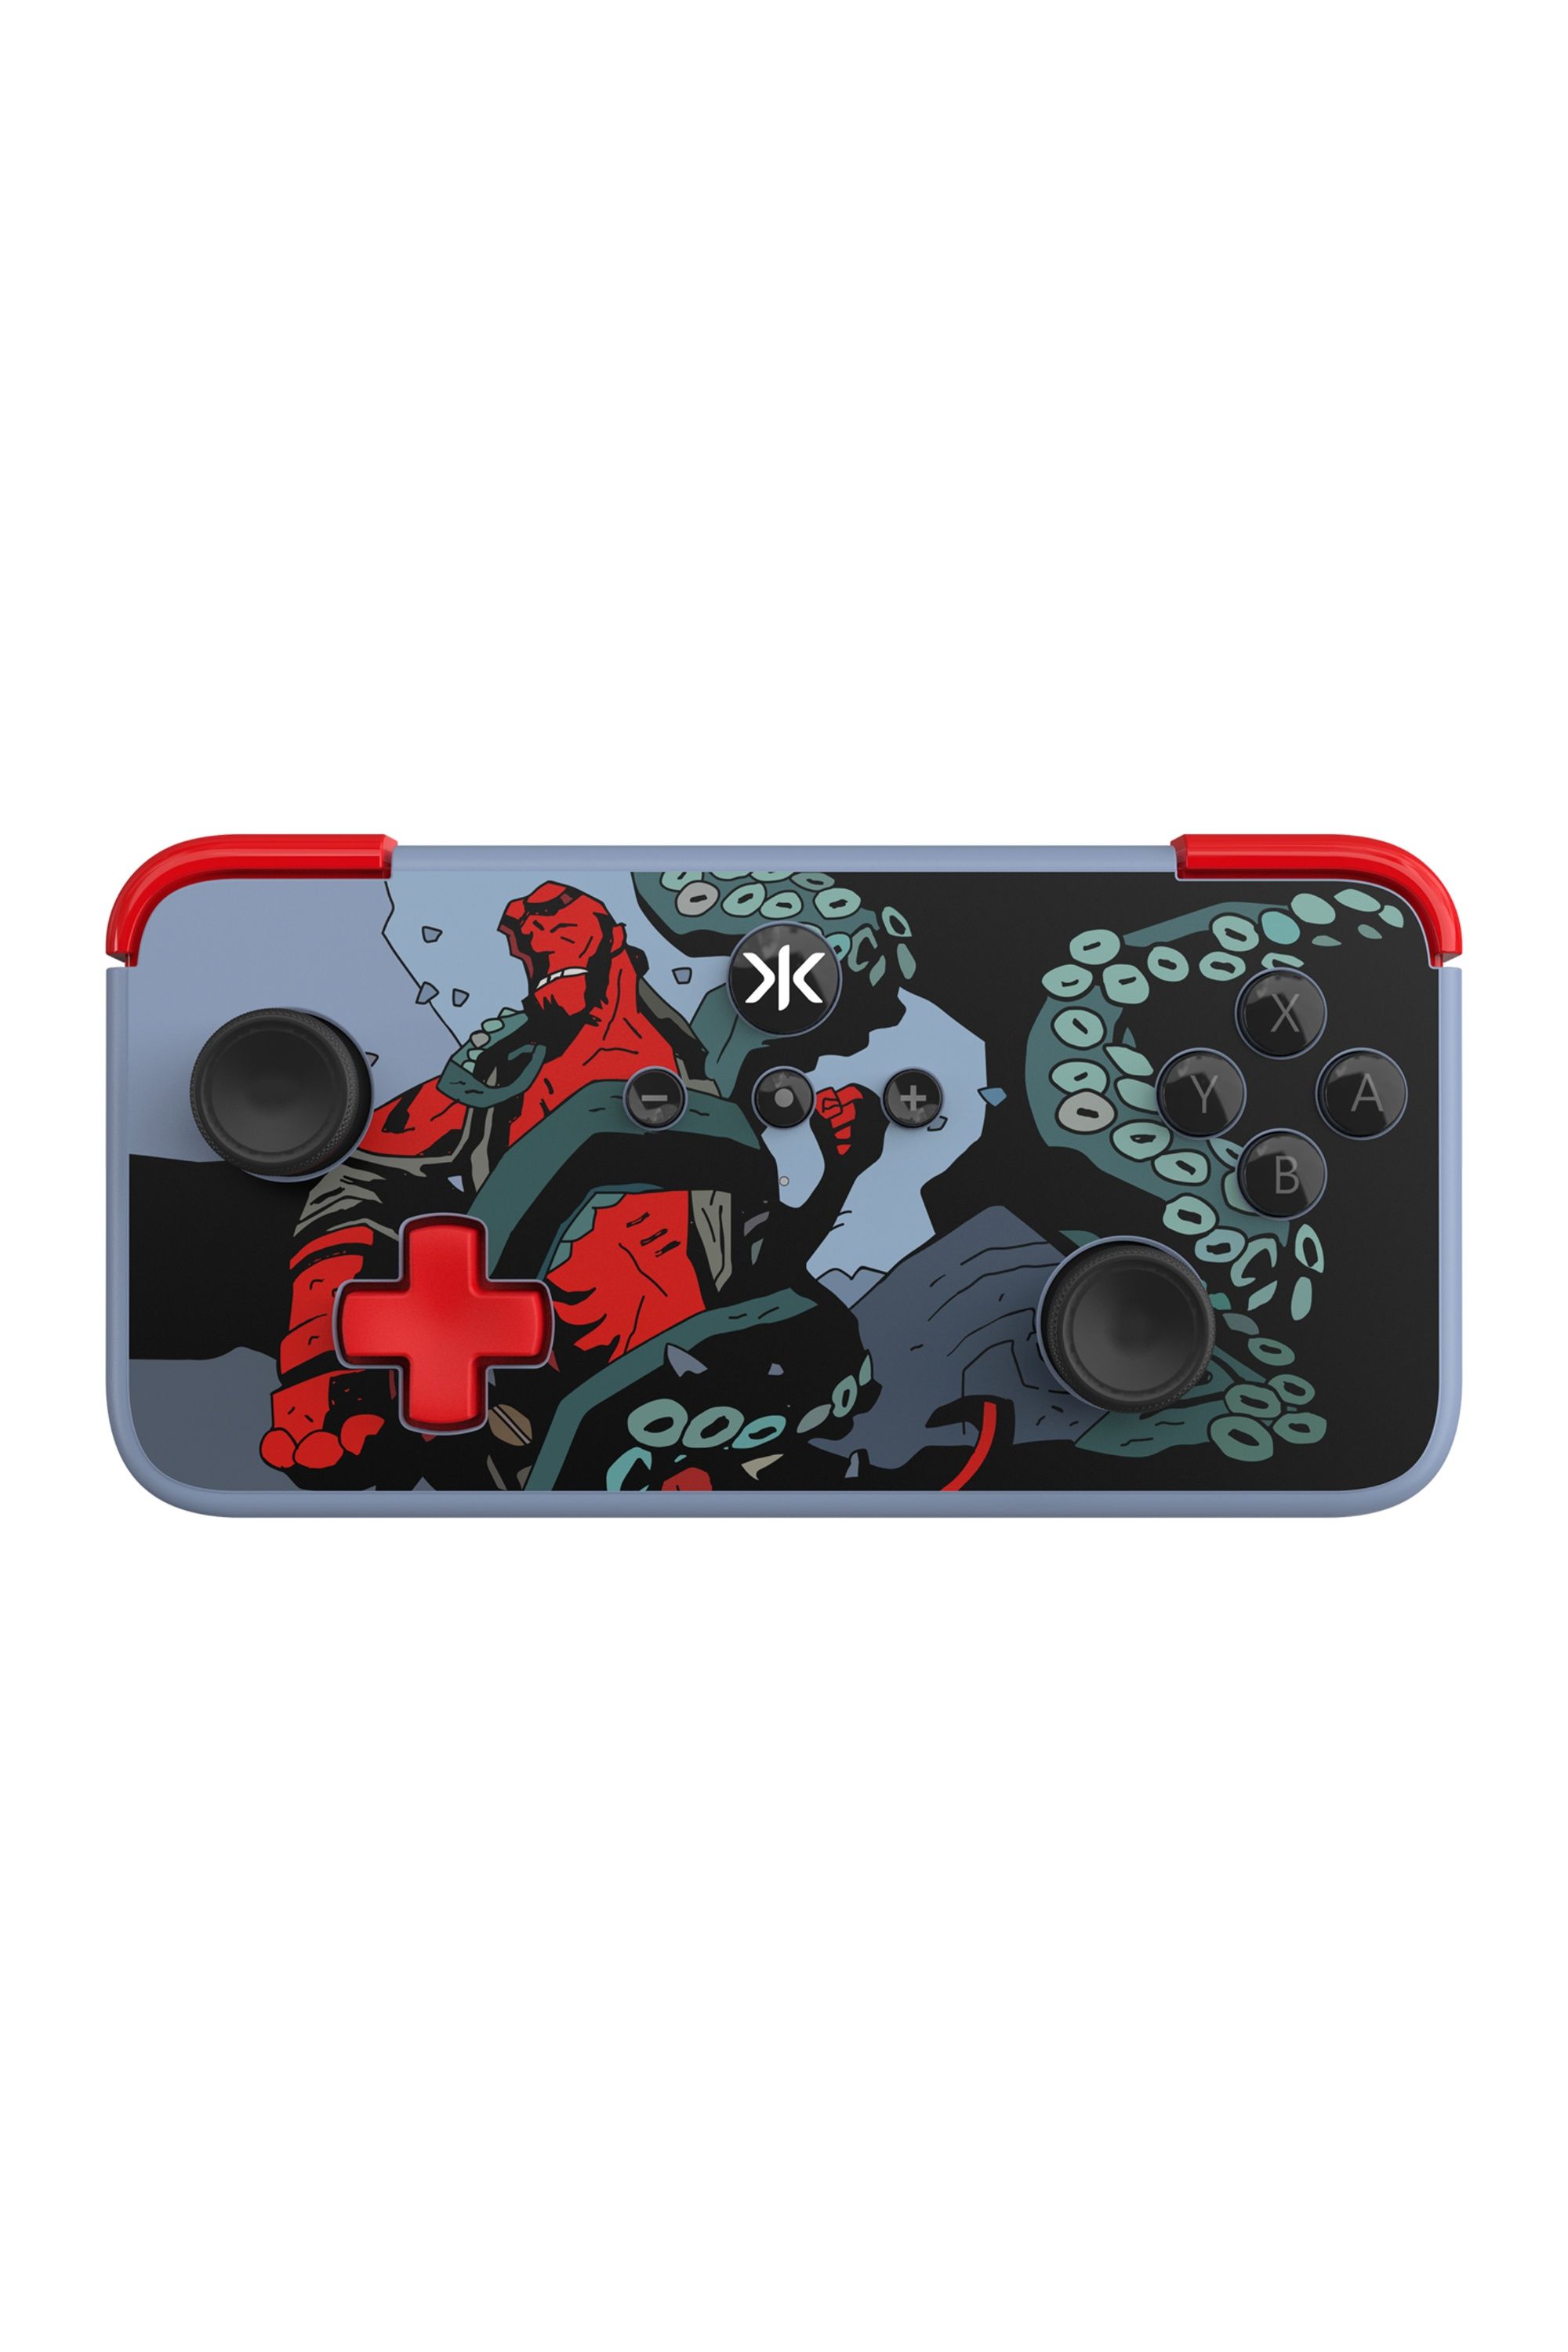 crkd neo s hellboy controller